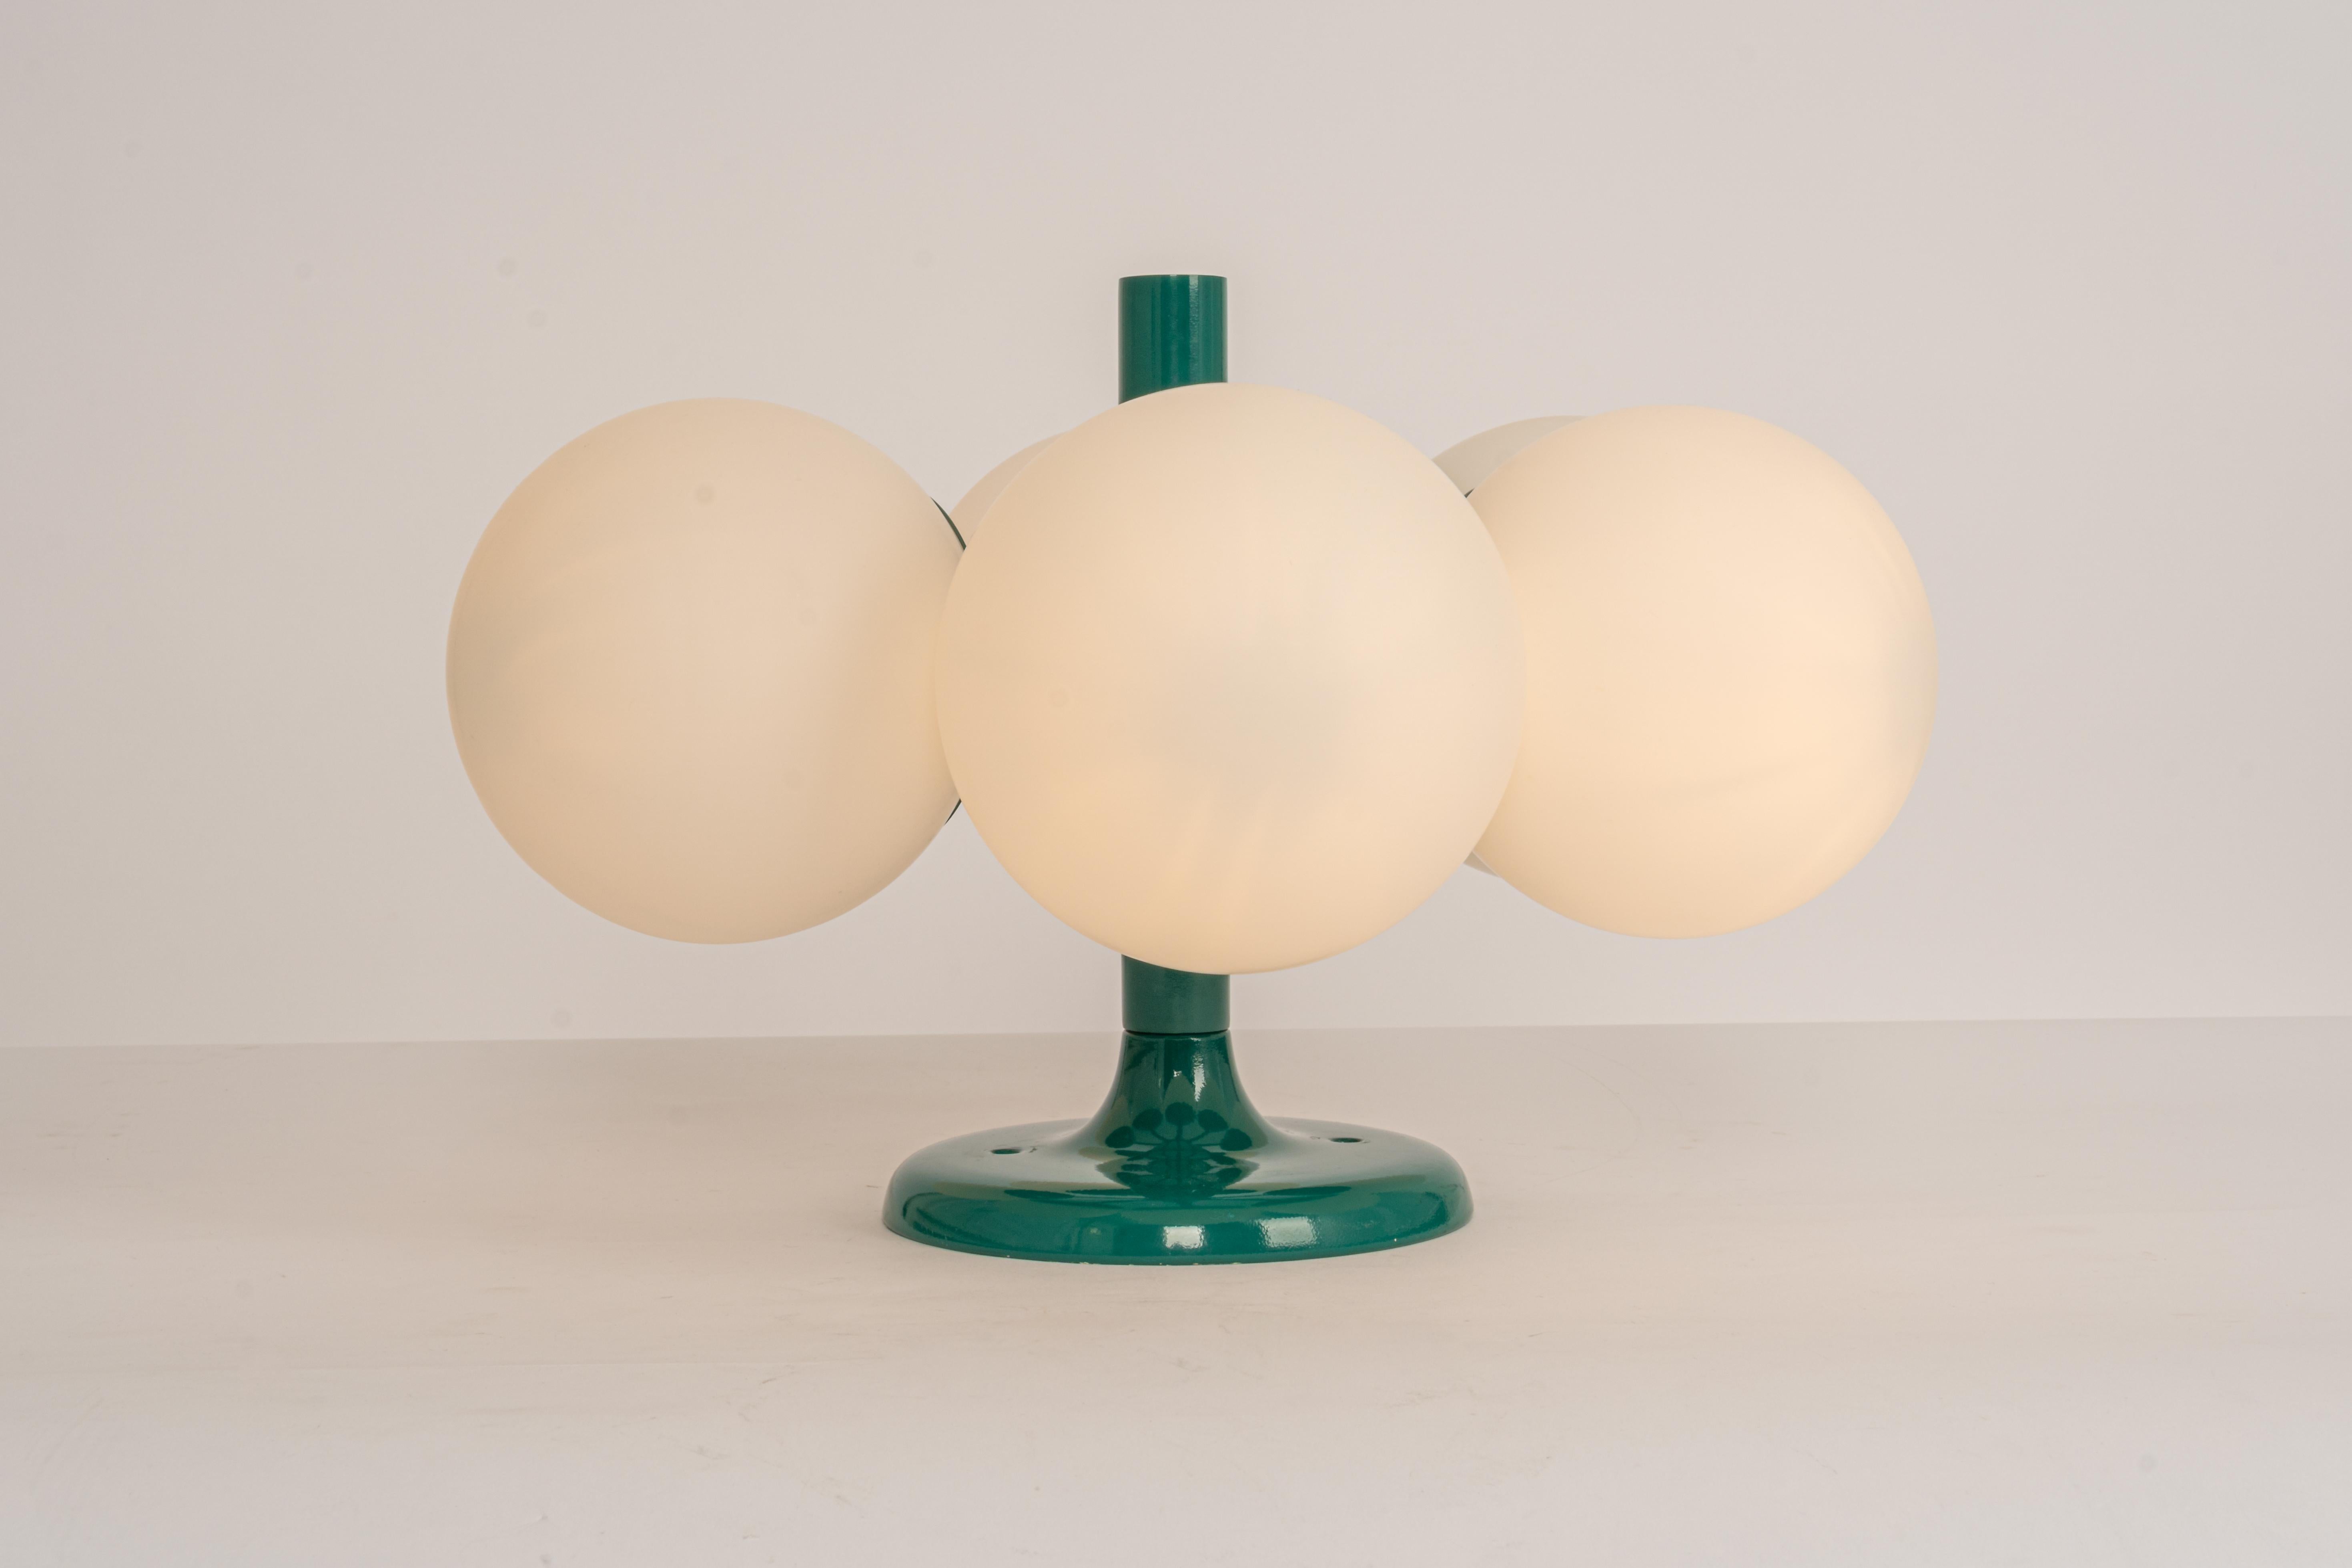 Midcentury Orbital Ceiling /Wall Lamp in Green by Kaiser, Germany, 1970s For Sale 2